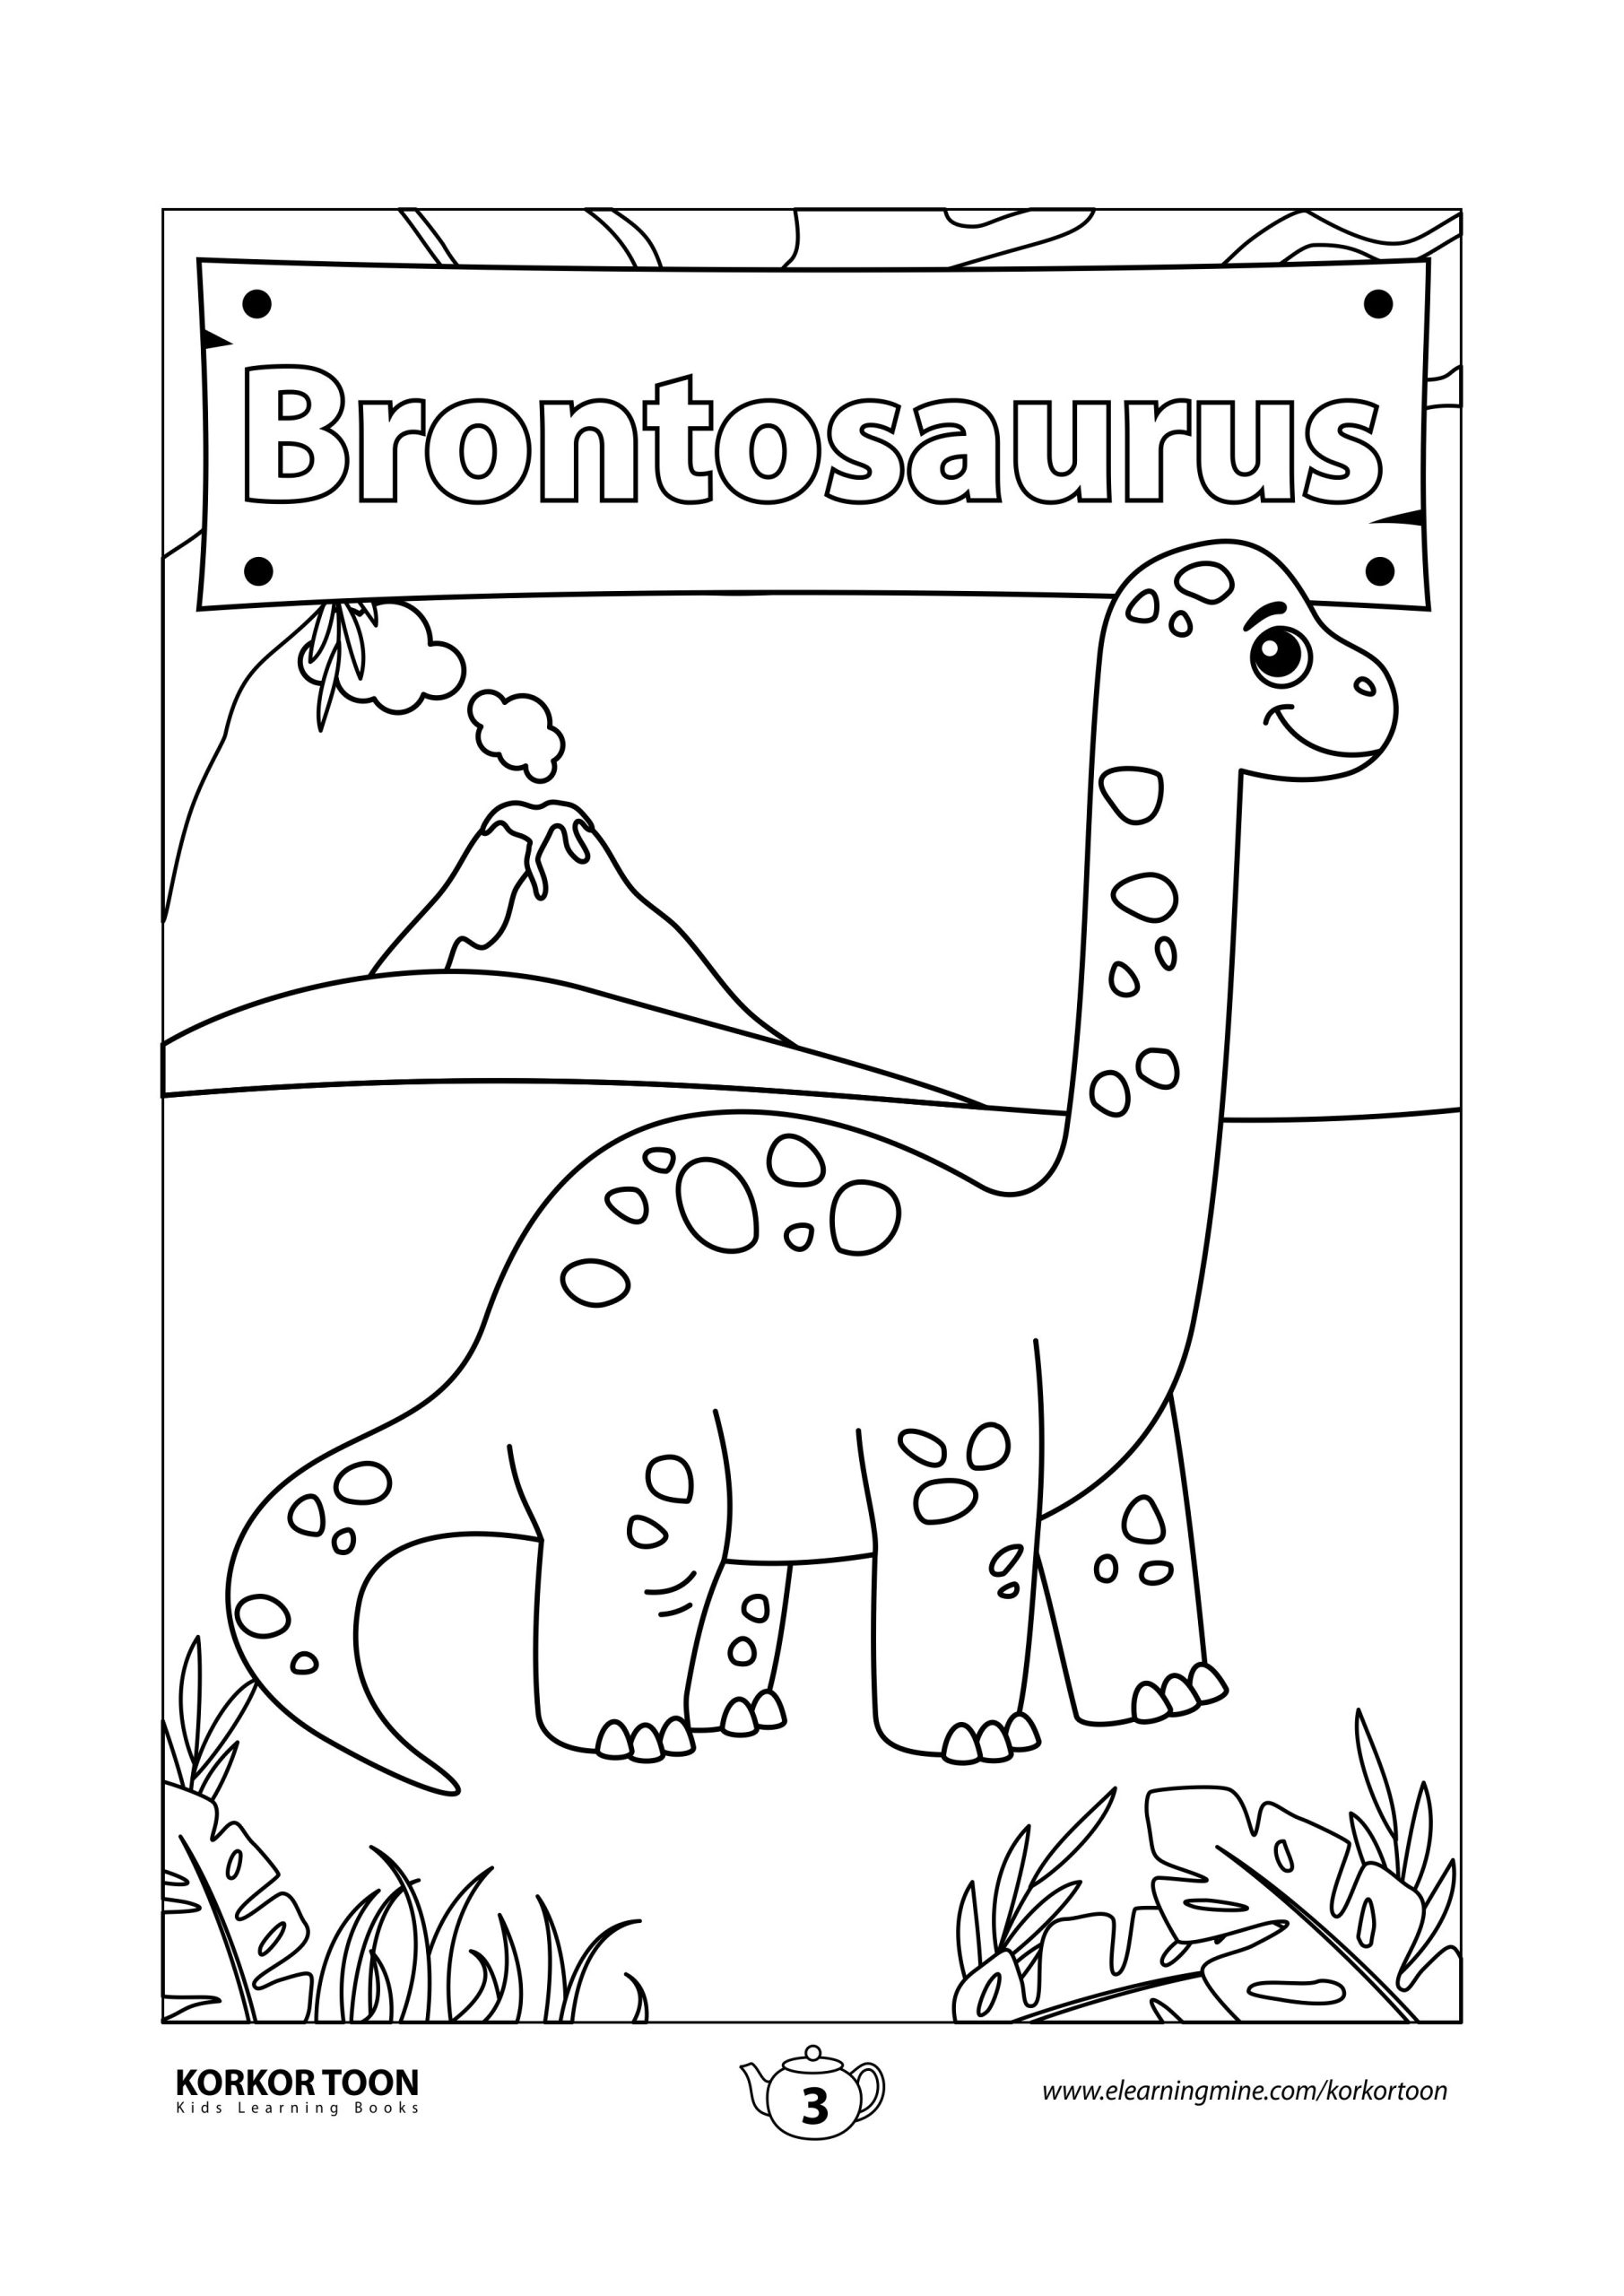 Dinosaurs Coloring Book for Kids | Brontosaurus Coloring Page